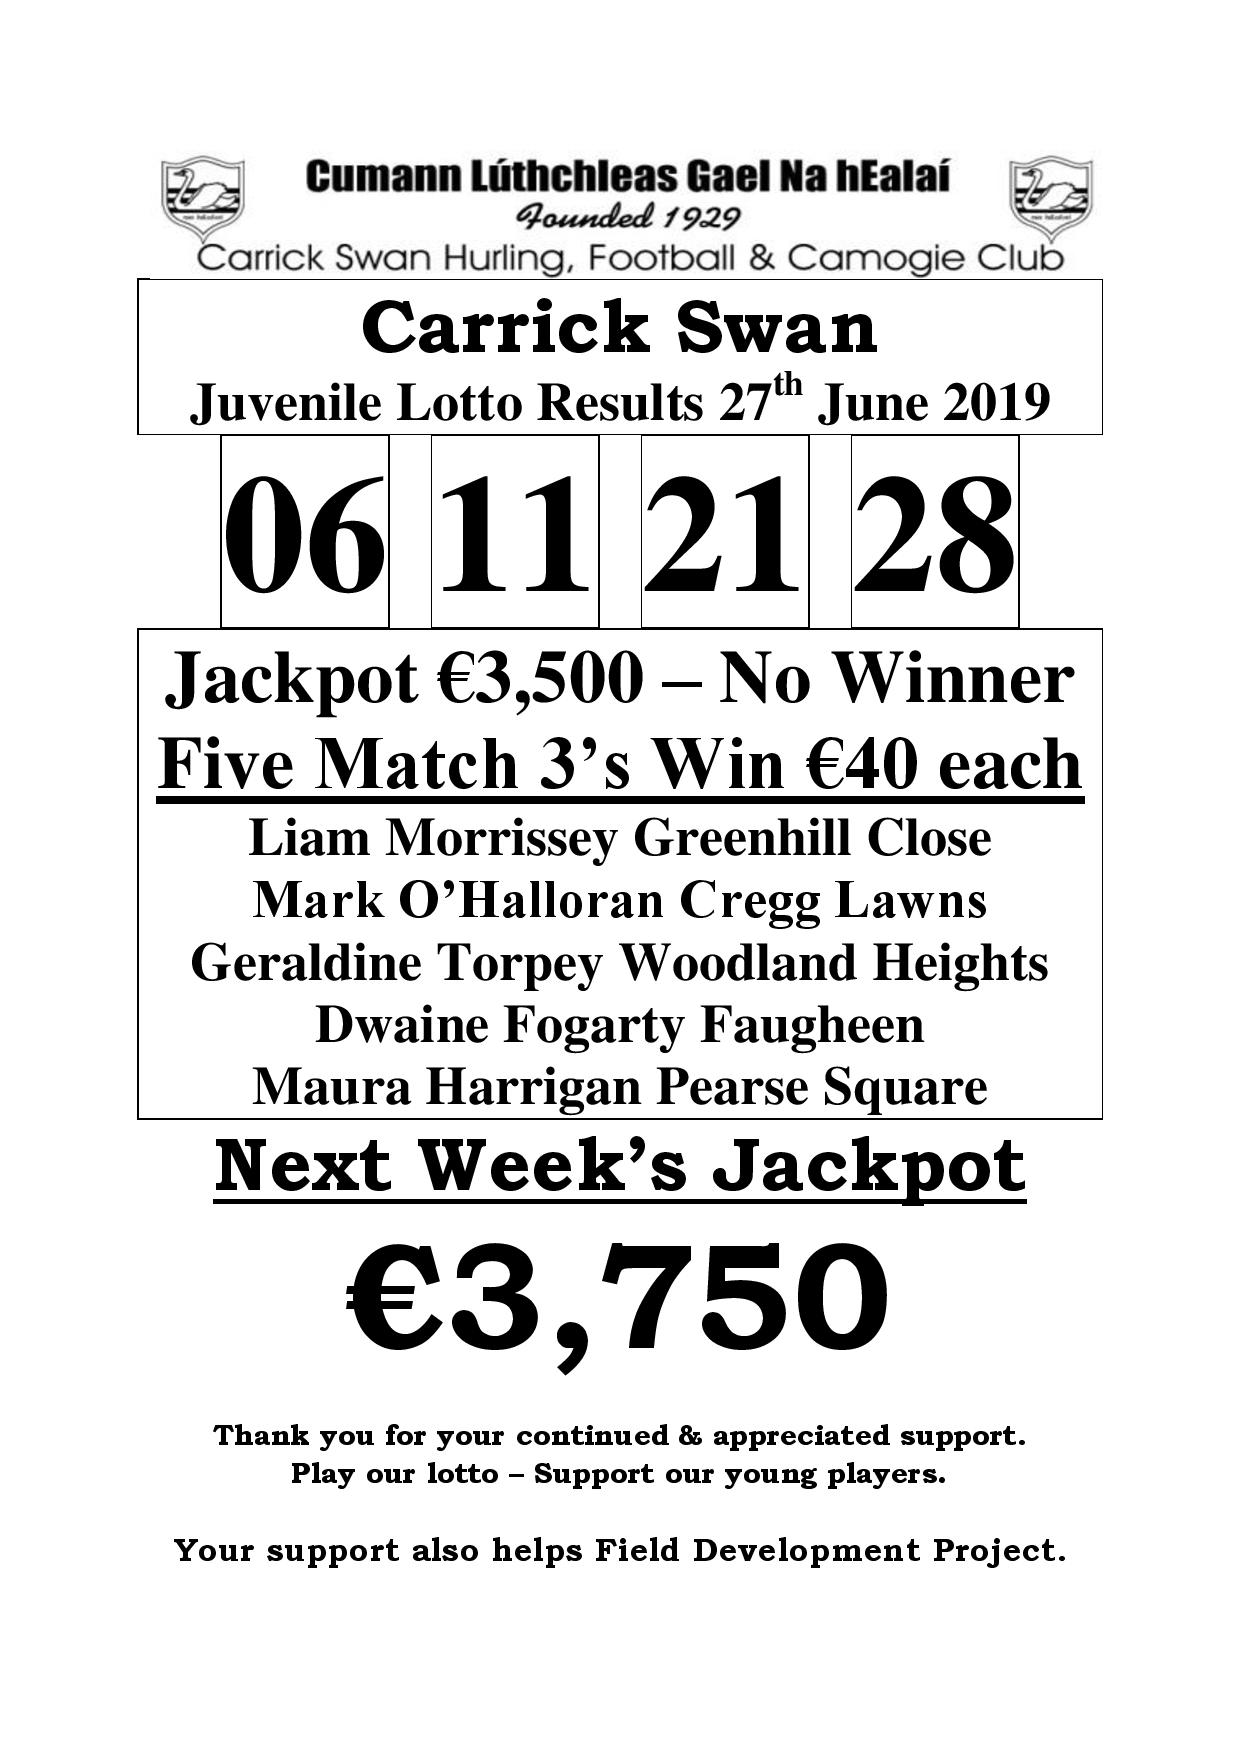 lotto results for 29th june 2019